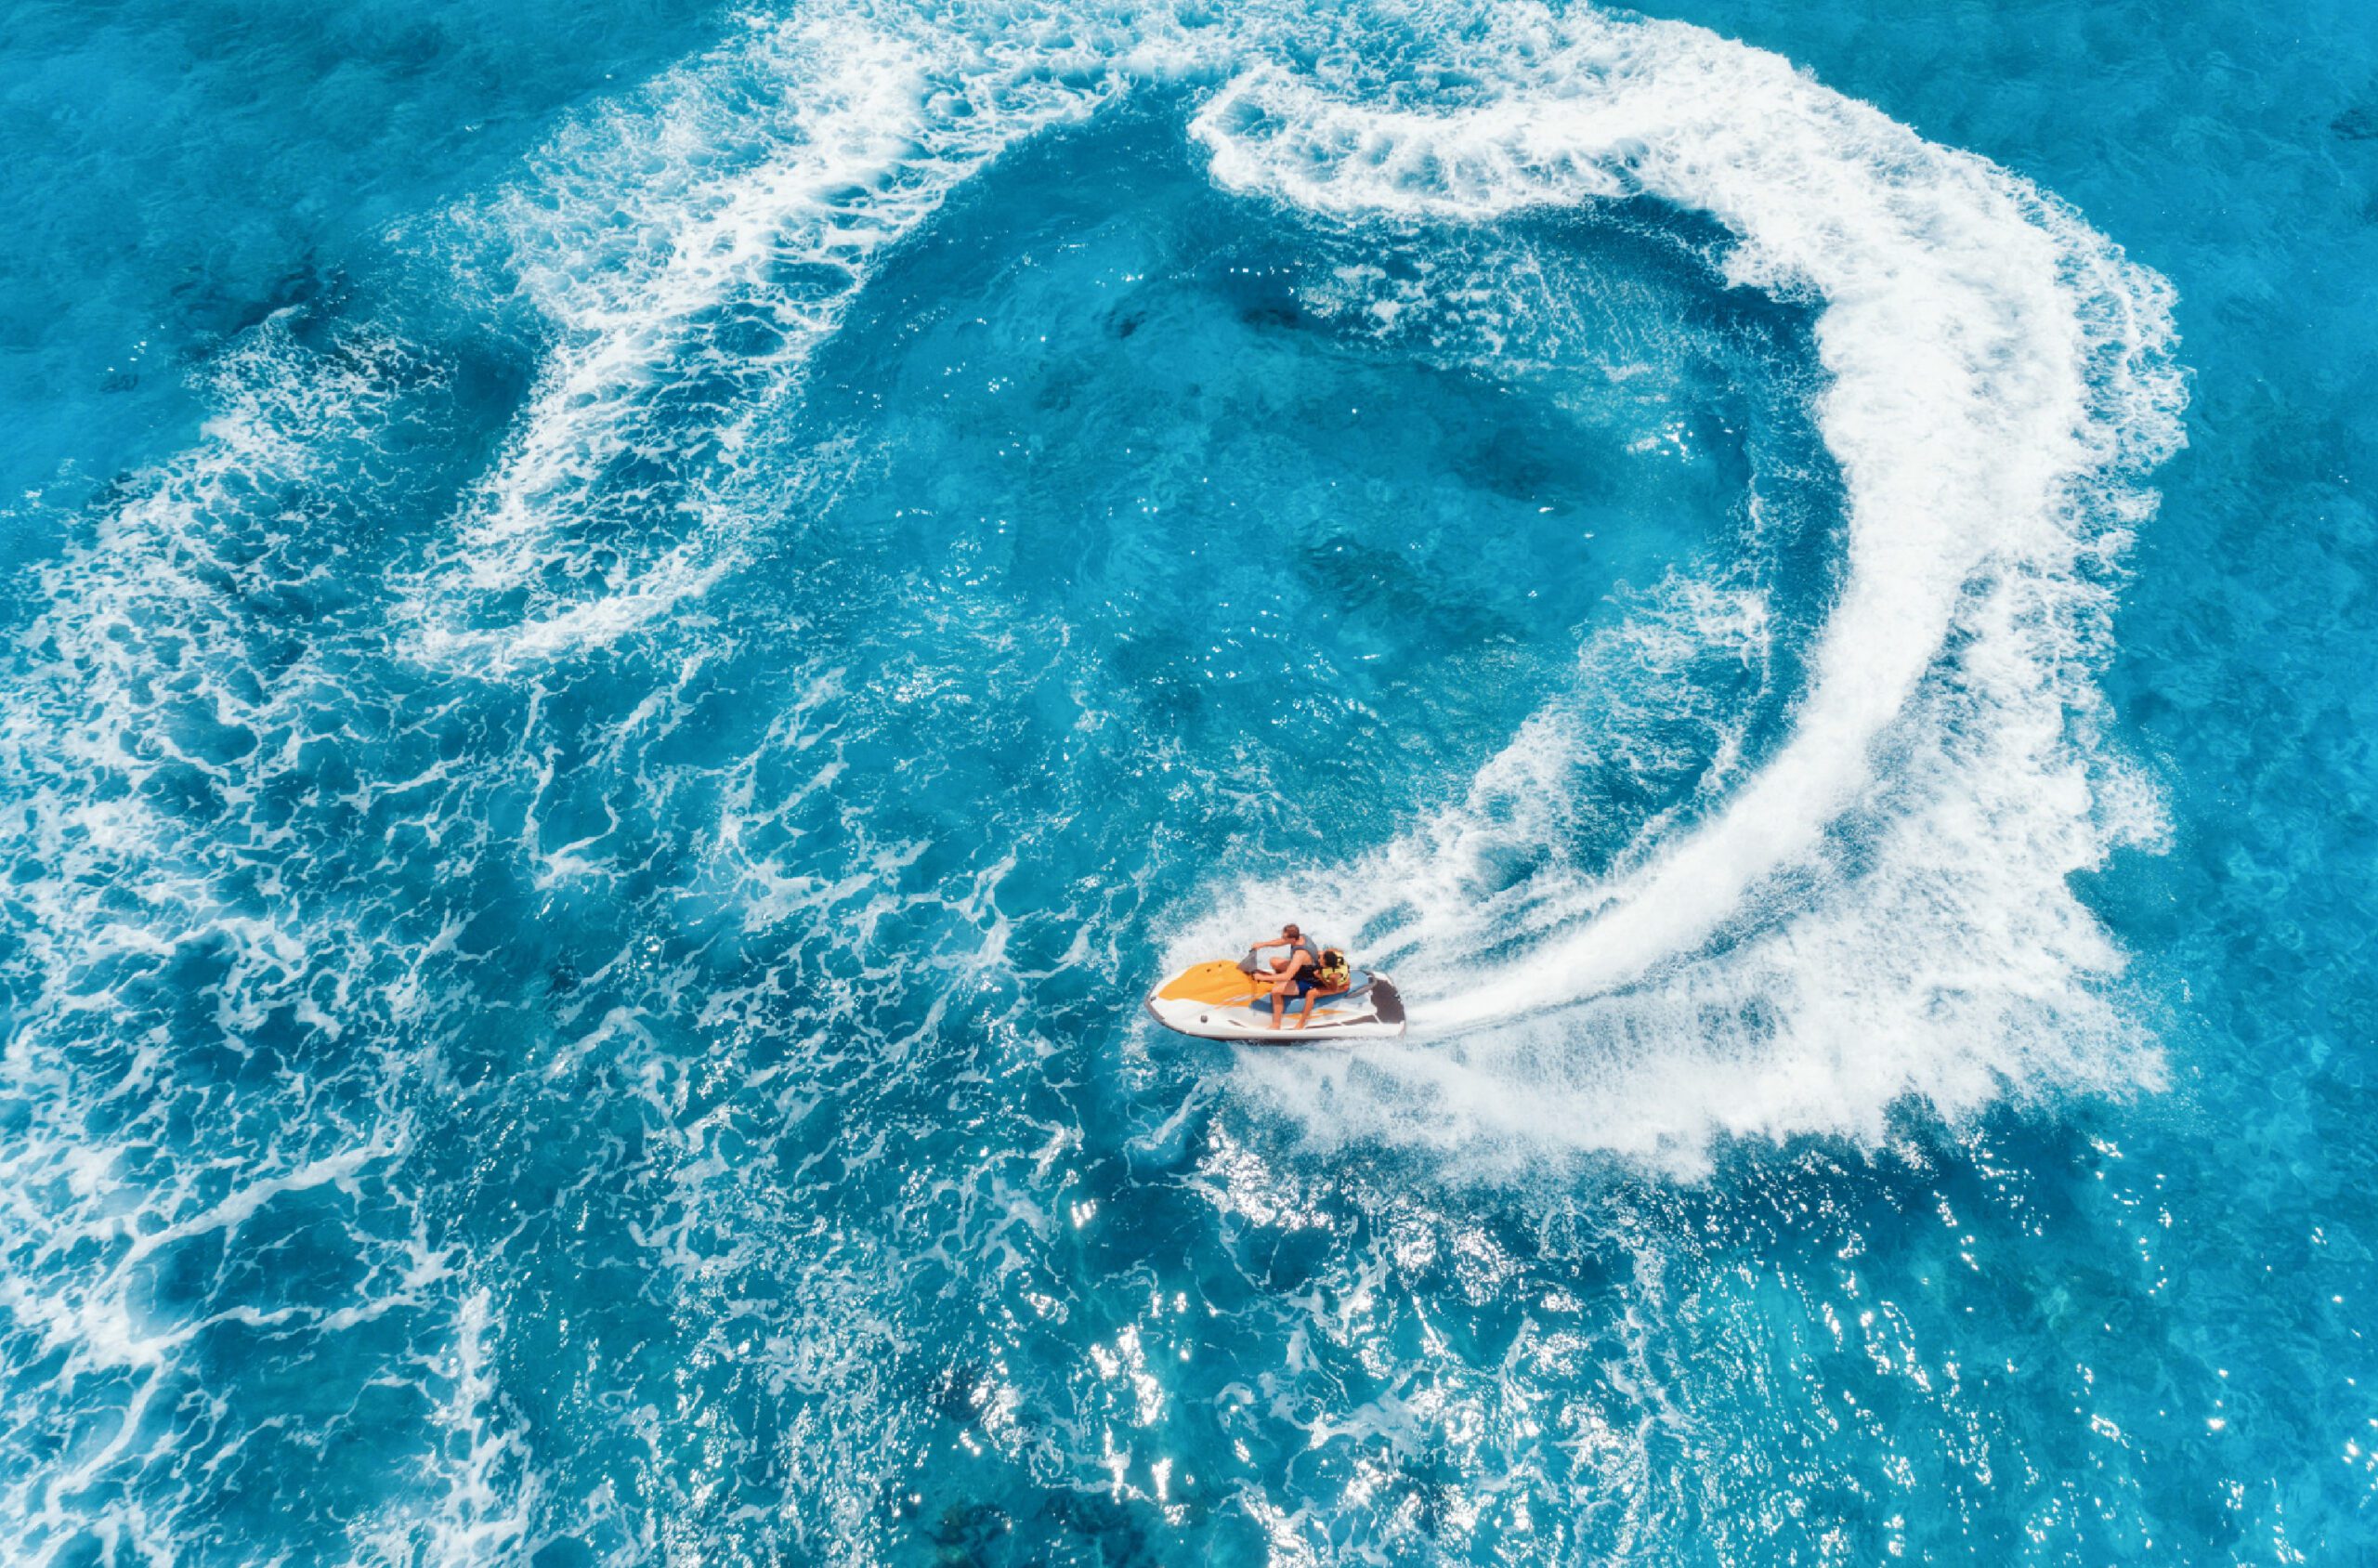 Gliding through the waves of Blue Waters